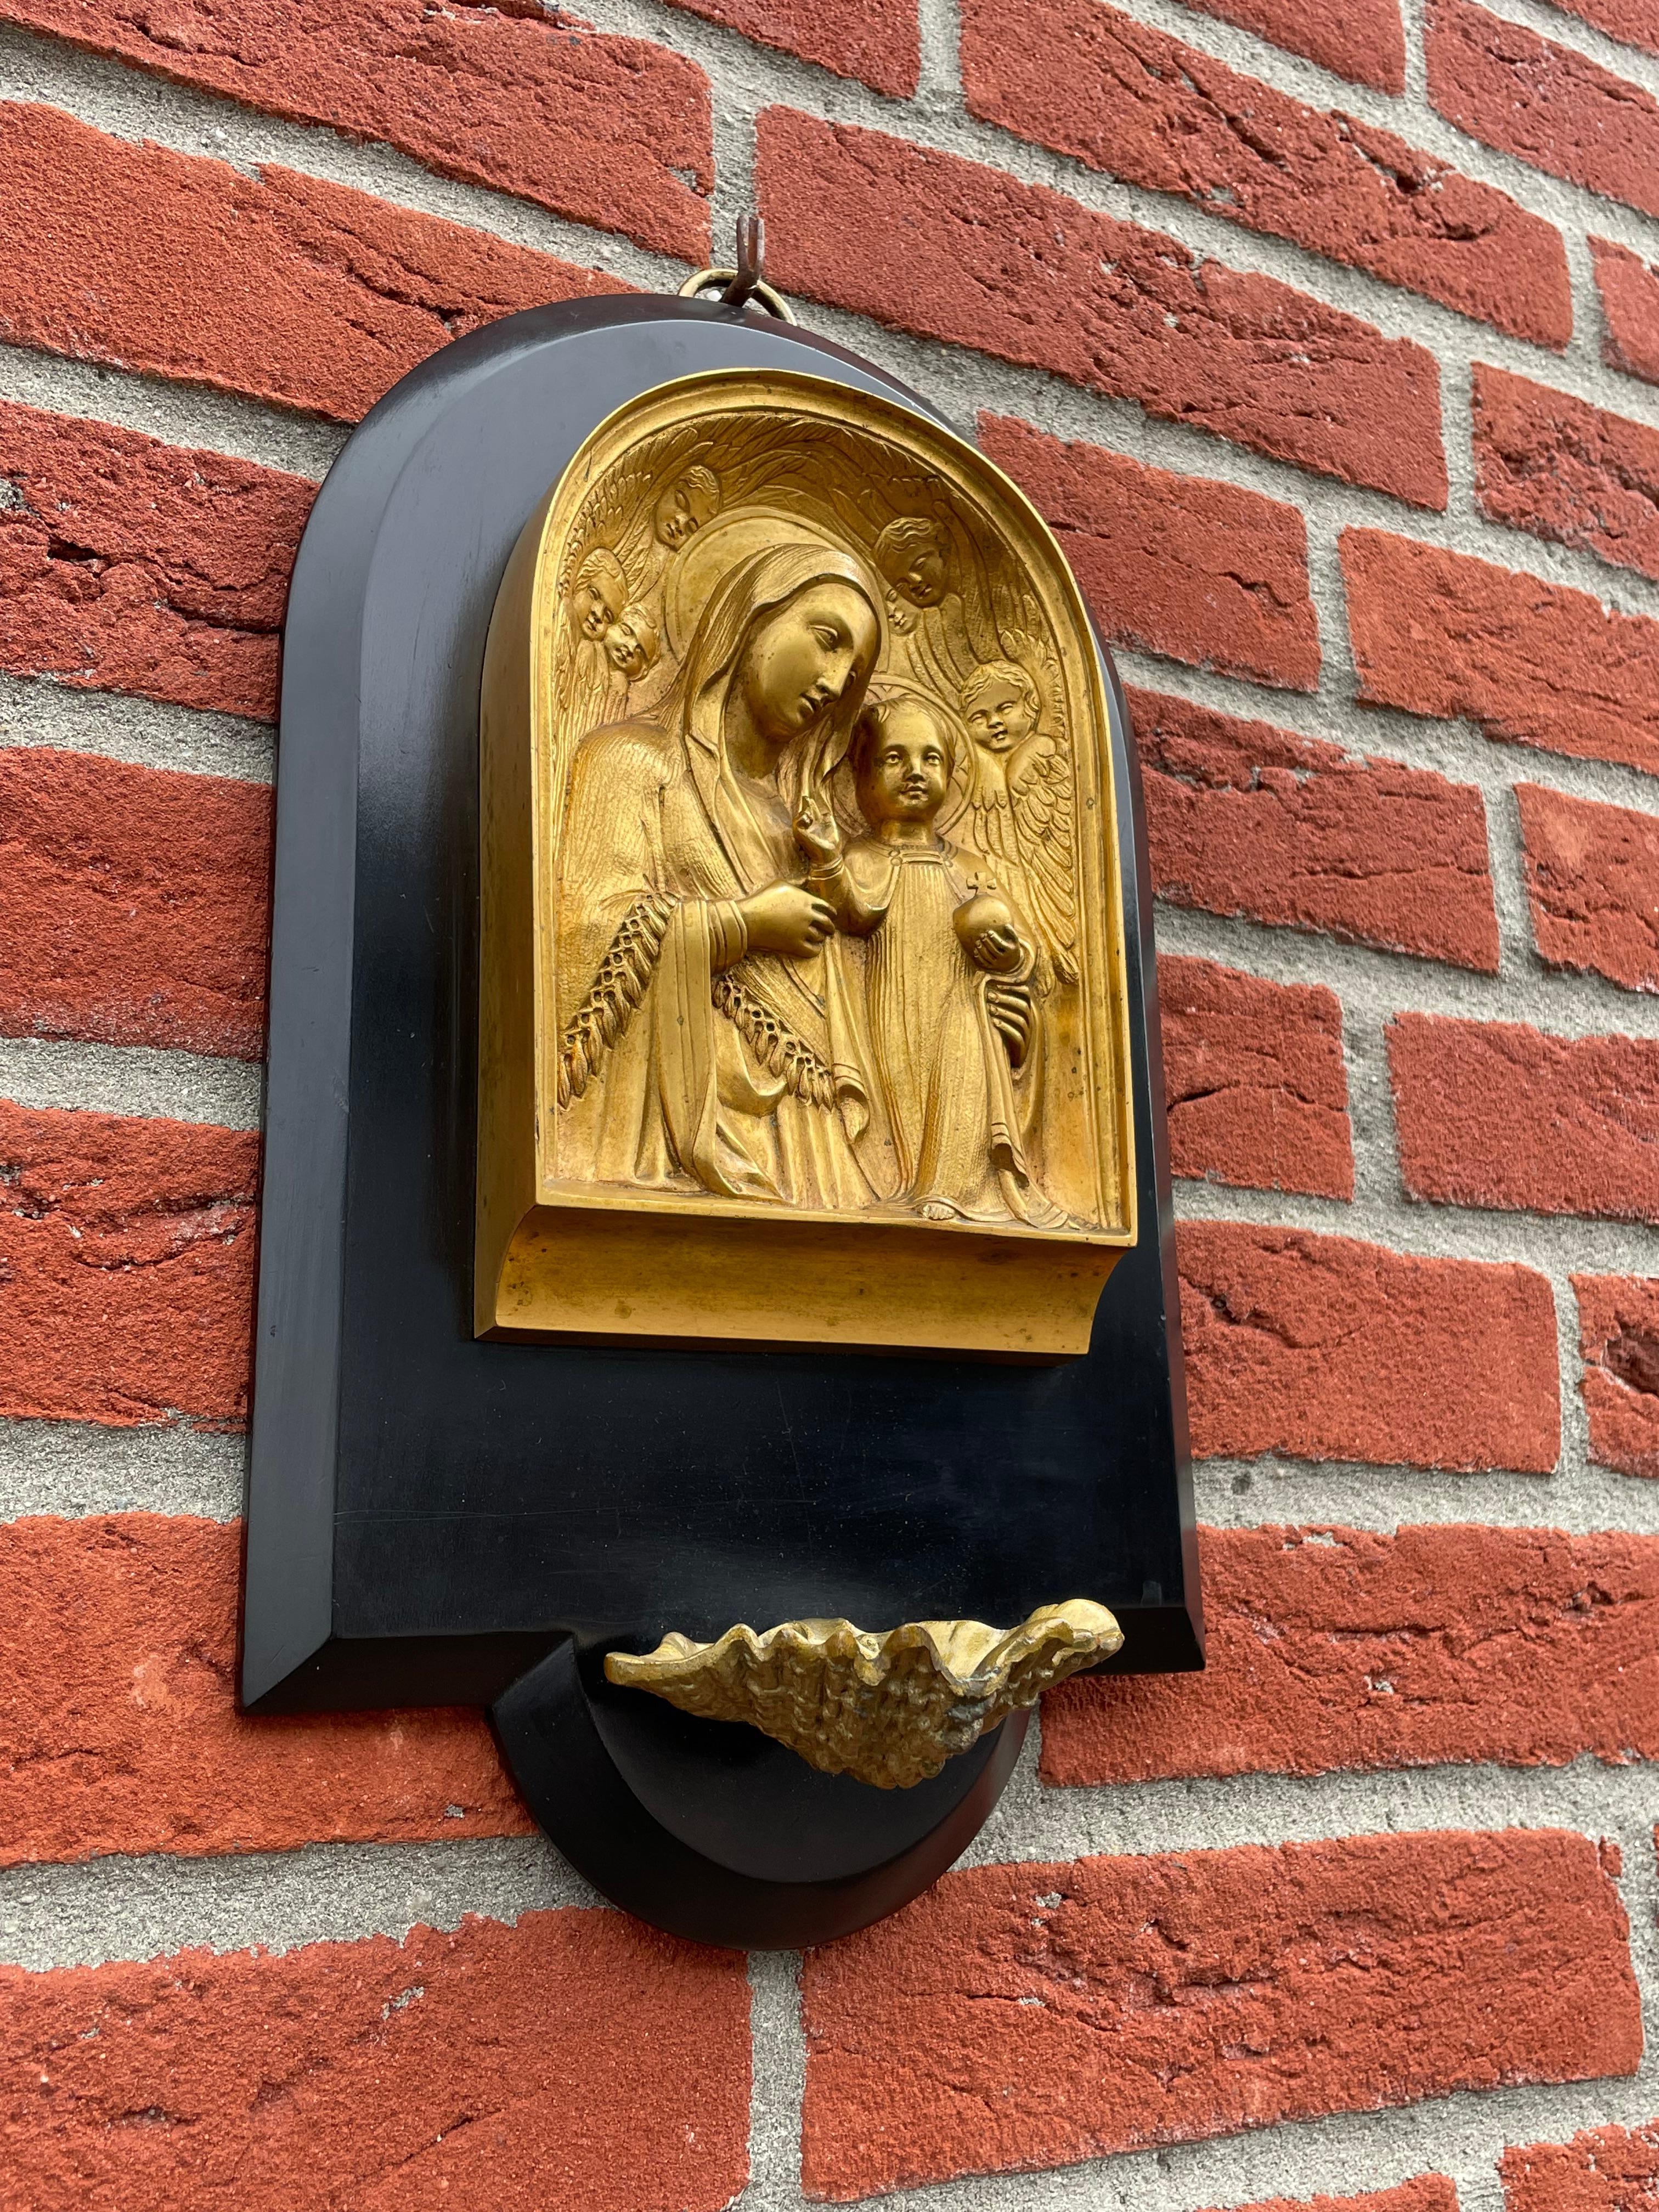 Meaningful and perfectly hand-crafted antique church relic.

This religious work of art dates from the earliest years of the 20th century and you could not wish for a better condition antique. This finest of holy water font plaques could not be in